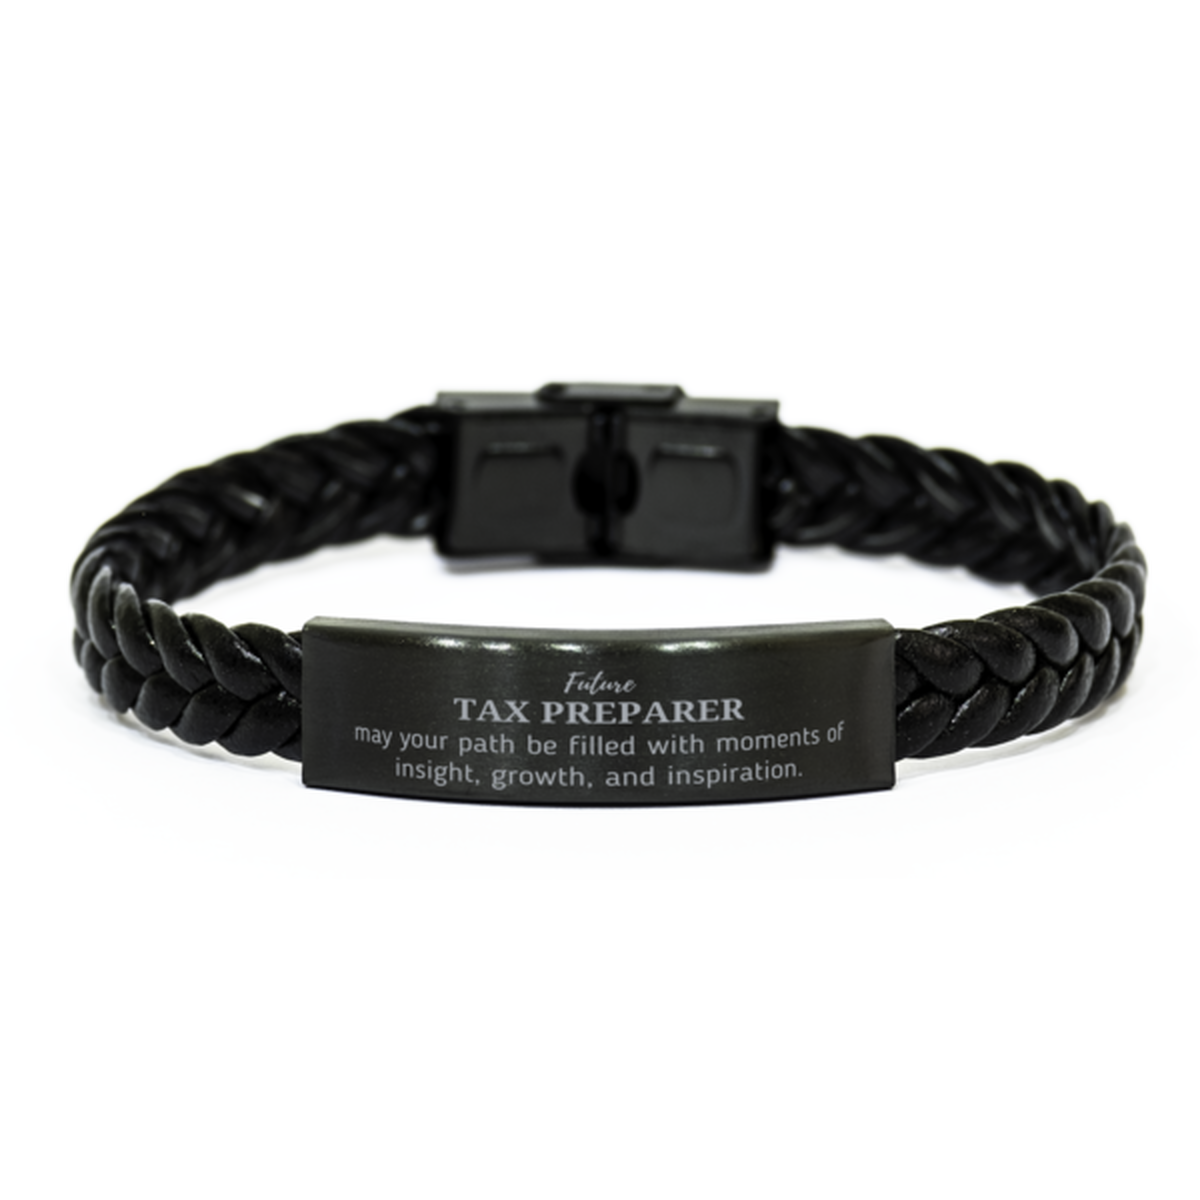 Future Tax Preparer Gifts, May your path be filled with moments of insight, Graduation Gifts for New Tax Preparer, Christmas Unique Braided Leather Bracelet For Men, Women, Friends